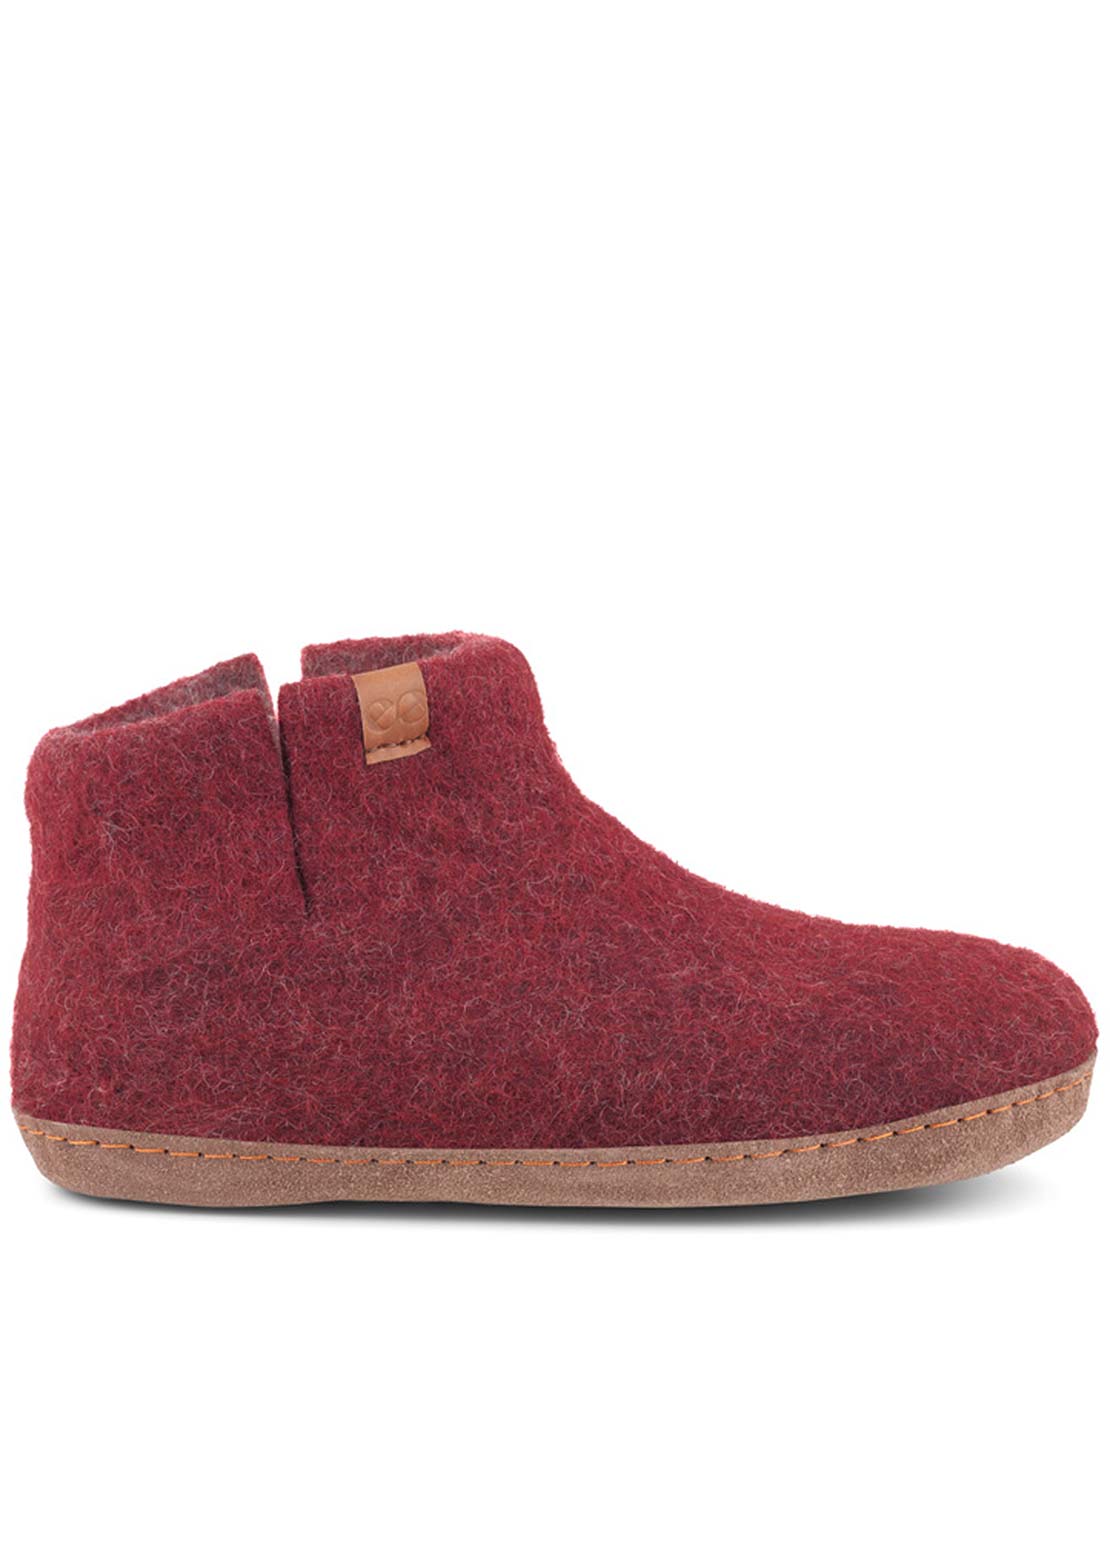 Wool by Green Unisex Everest Suede Sole Shoes Wine